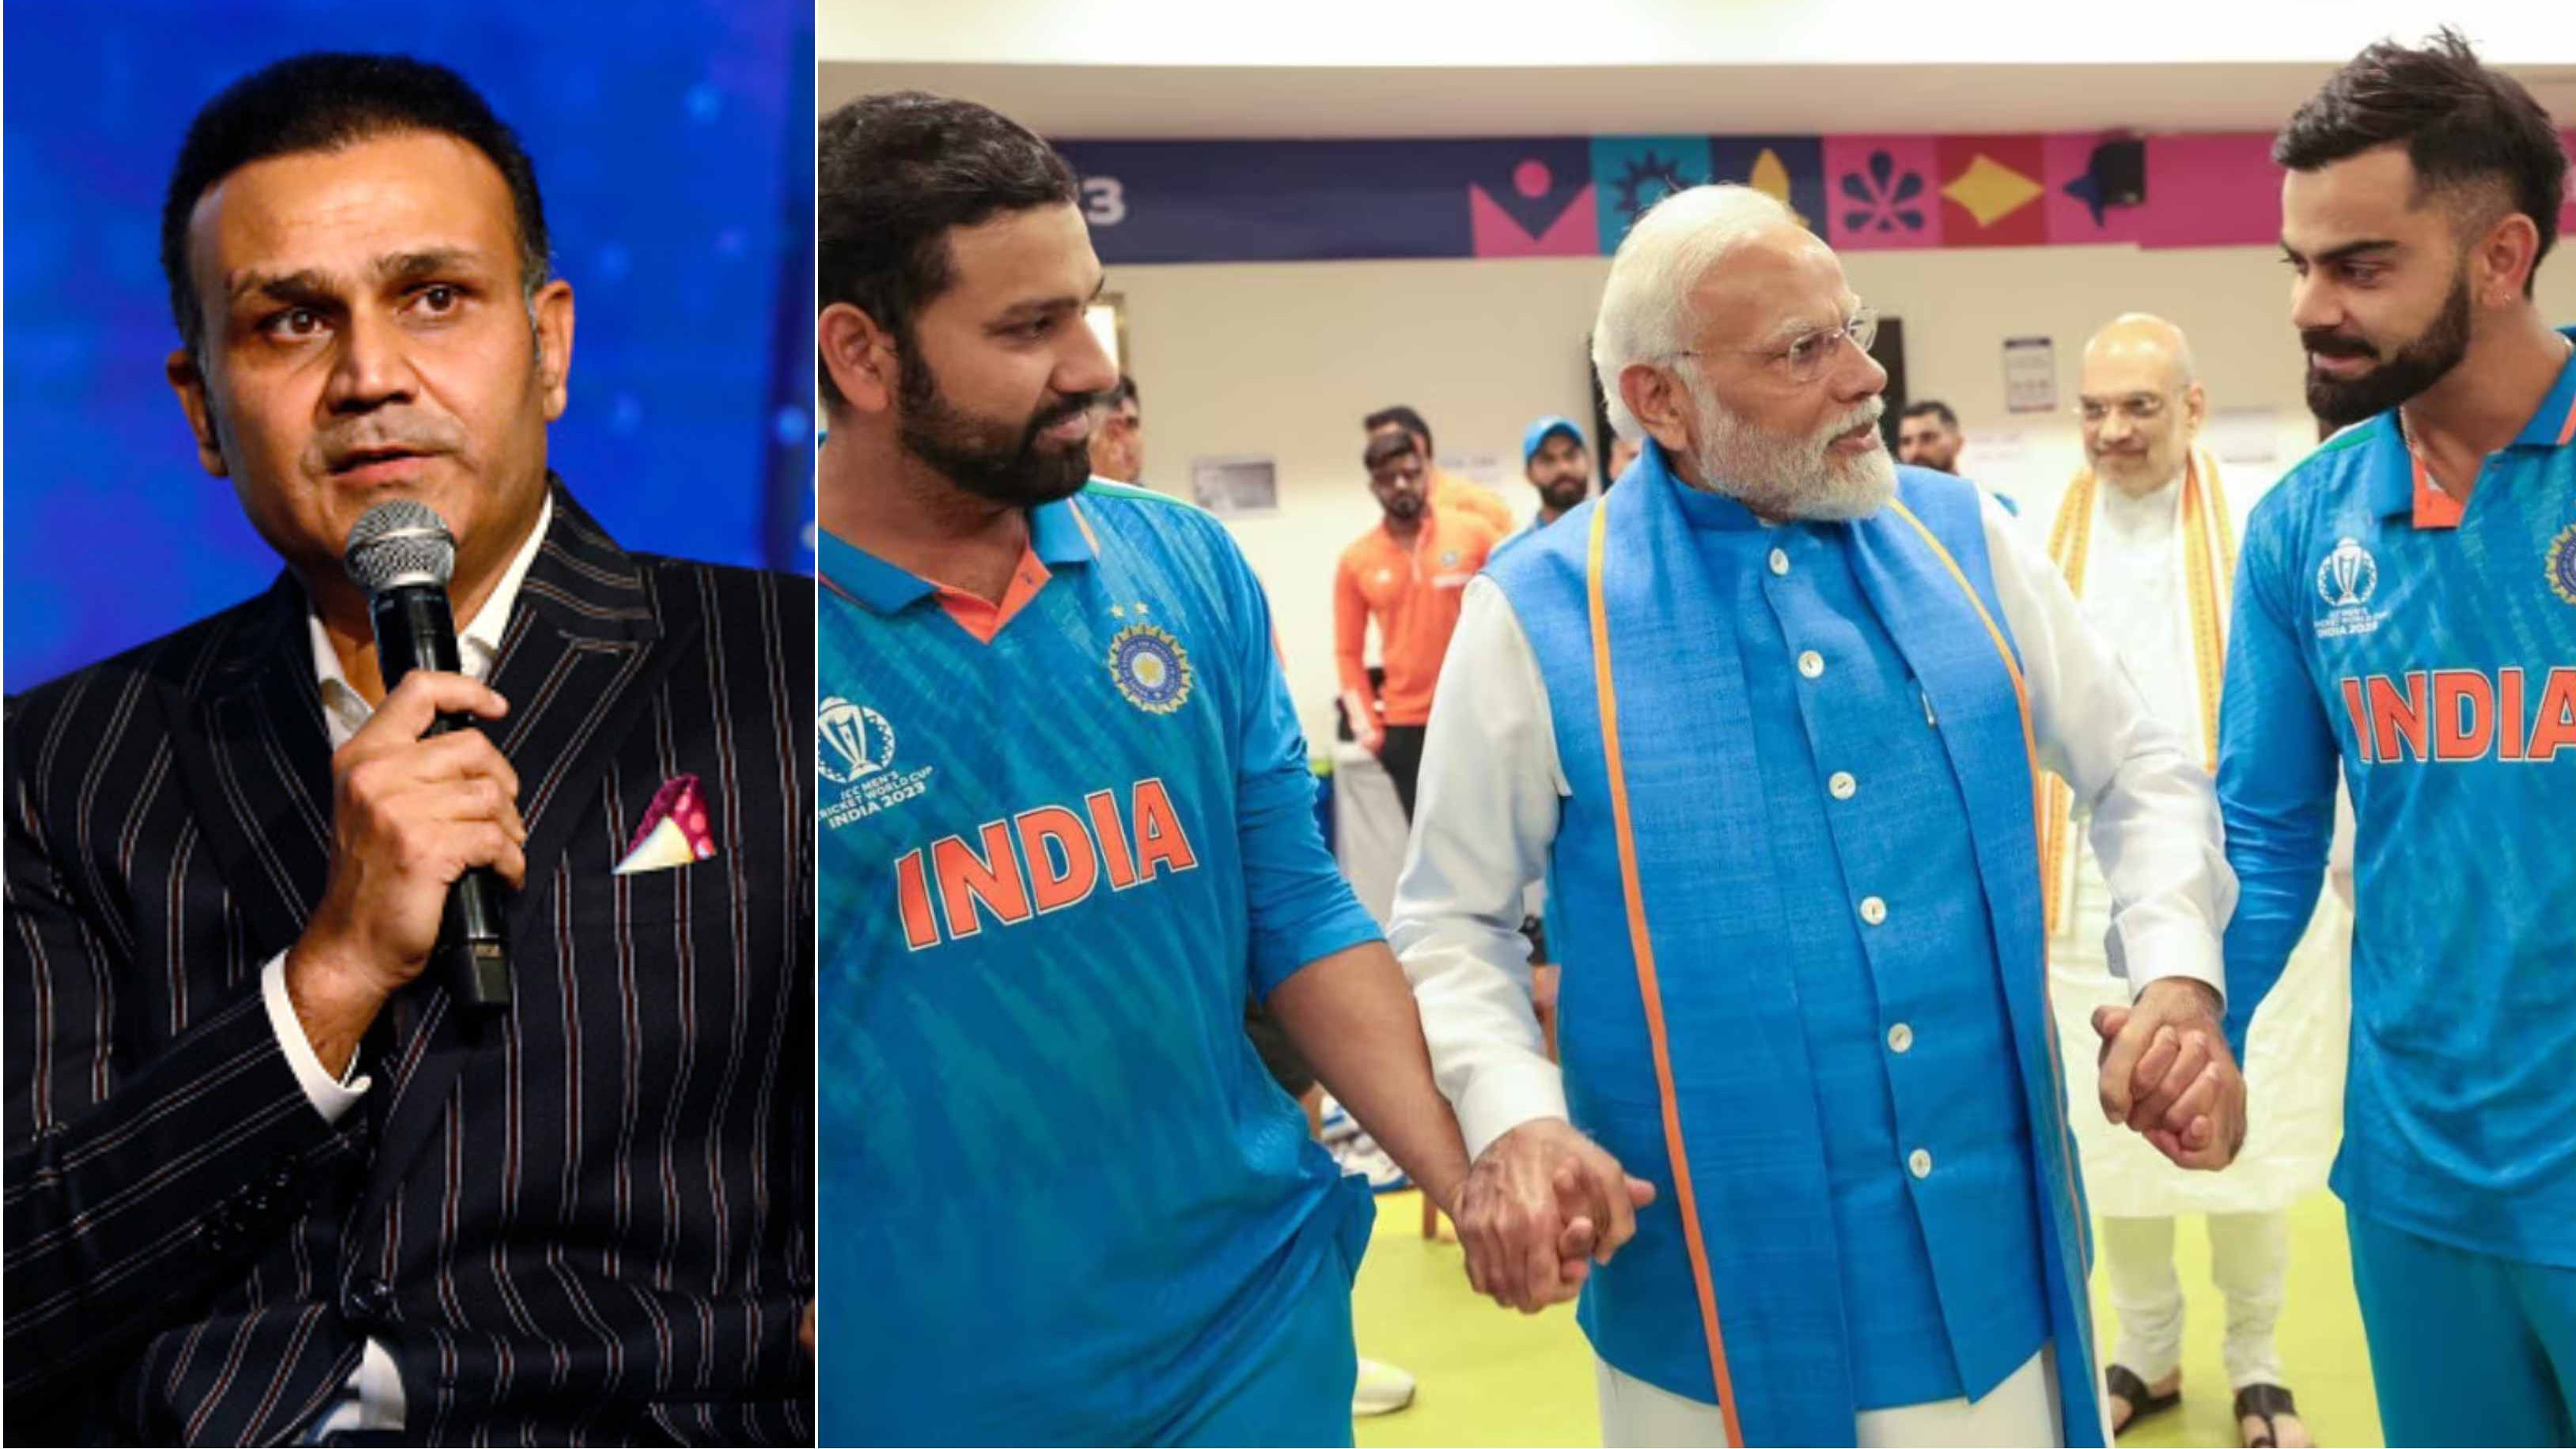 “It will motivate us to cross final hurdle,” Sehwag on PM Modi visiting Indian dressing room after World Cup final loss